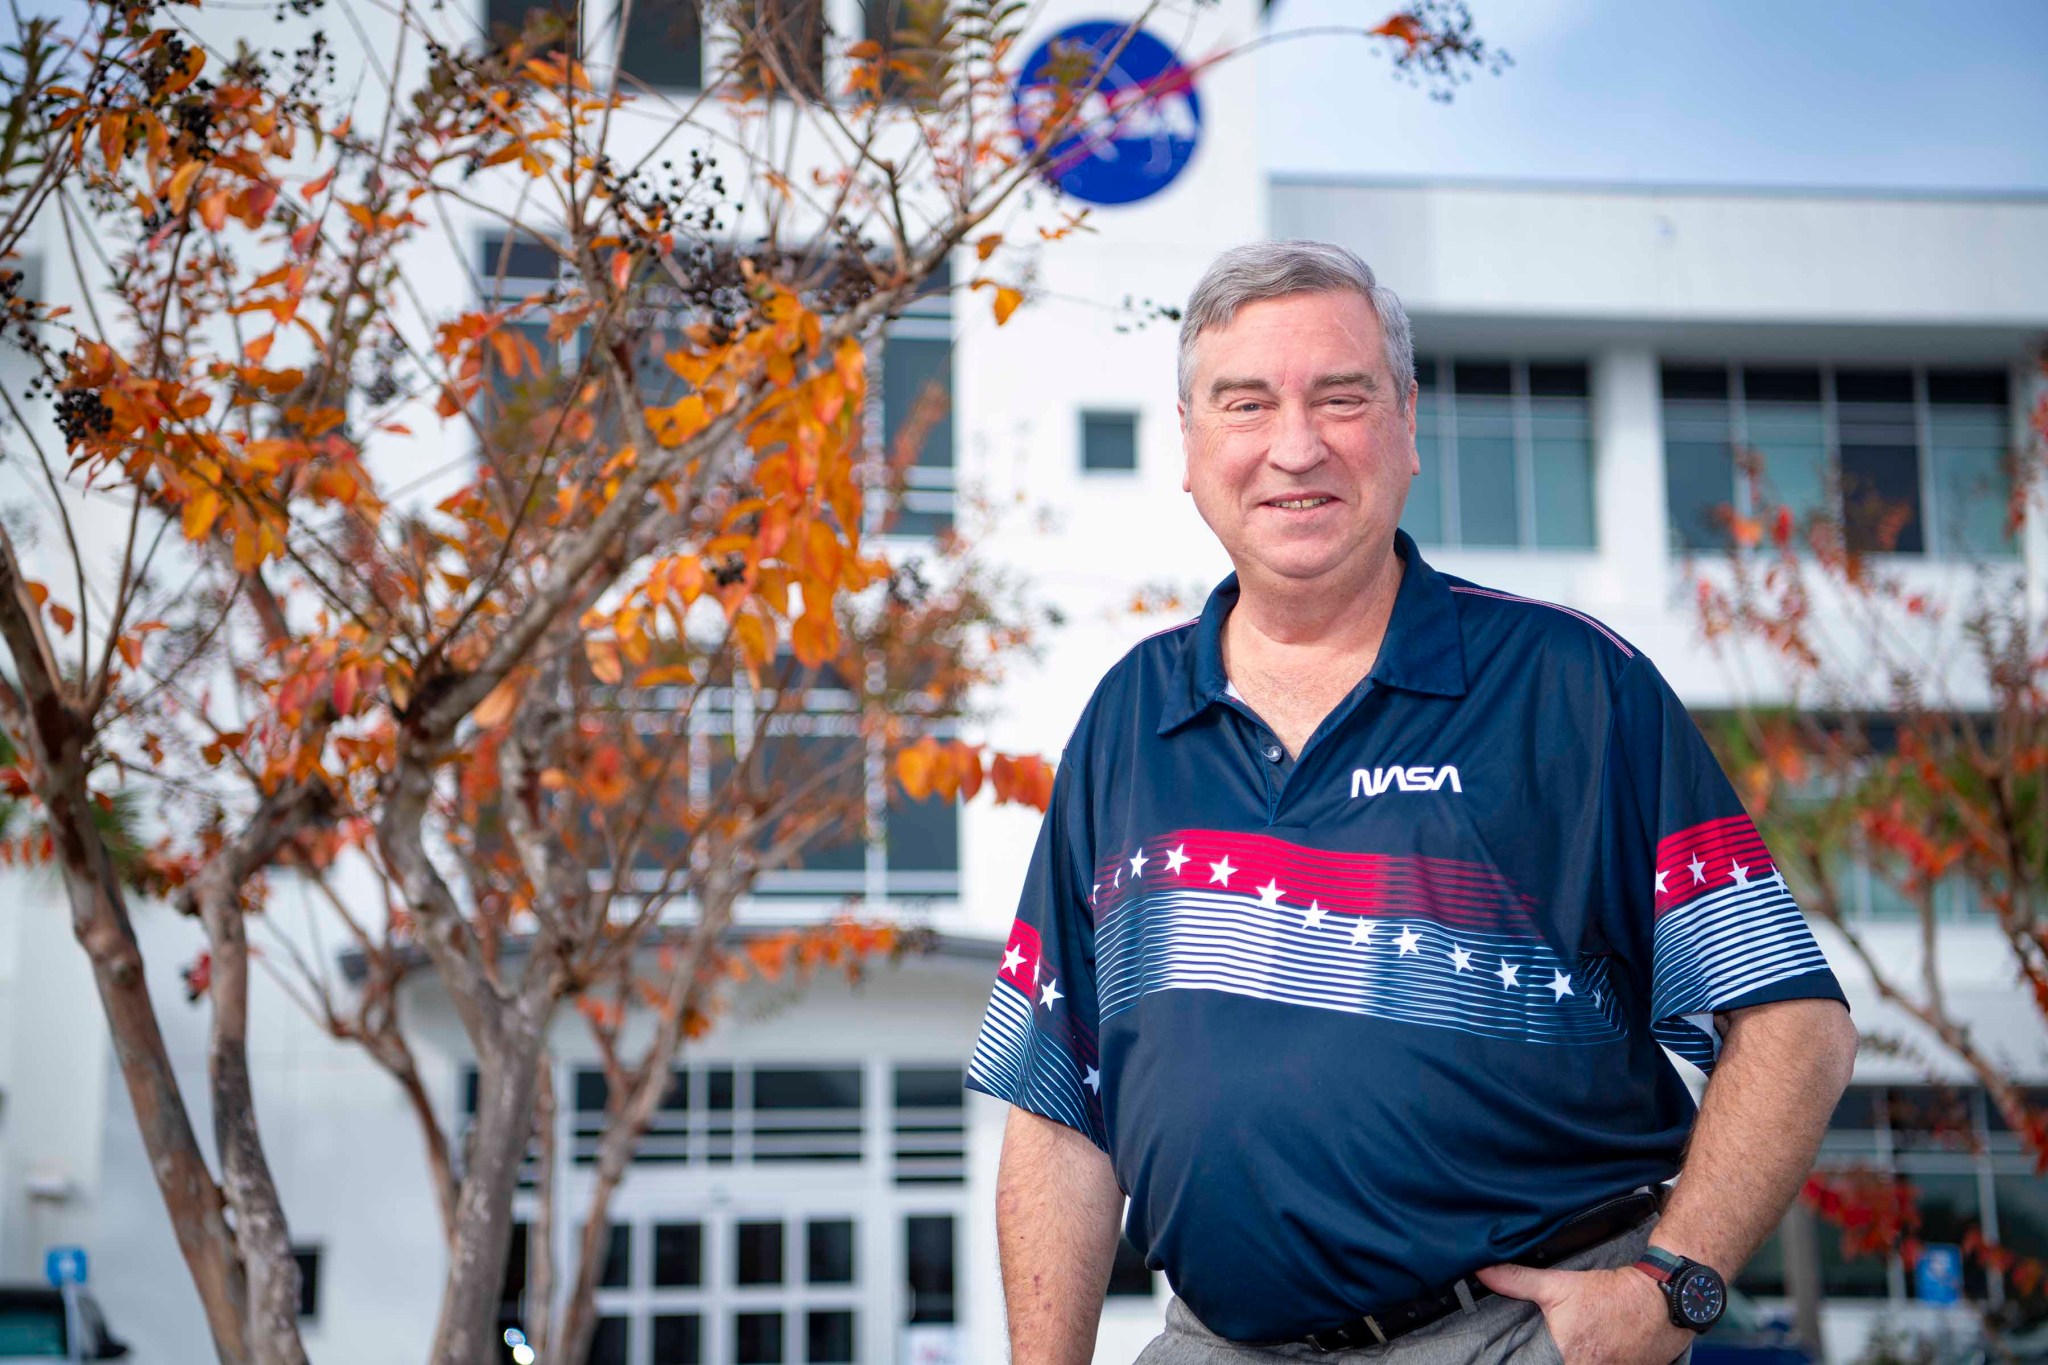 Tony Goretski, wearing a navy NASA polo shirt, smiles at the camera while standing outside of a building at NASA’s Stennis Space Center